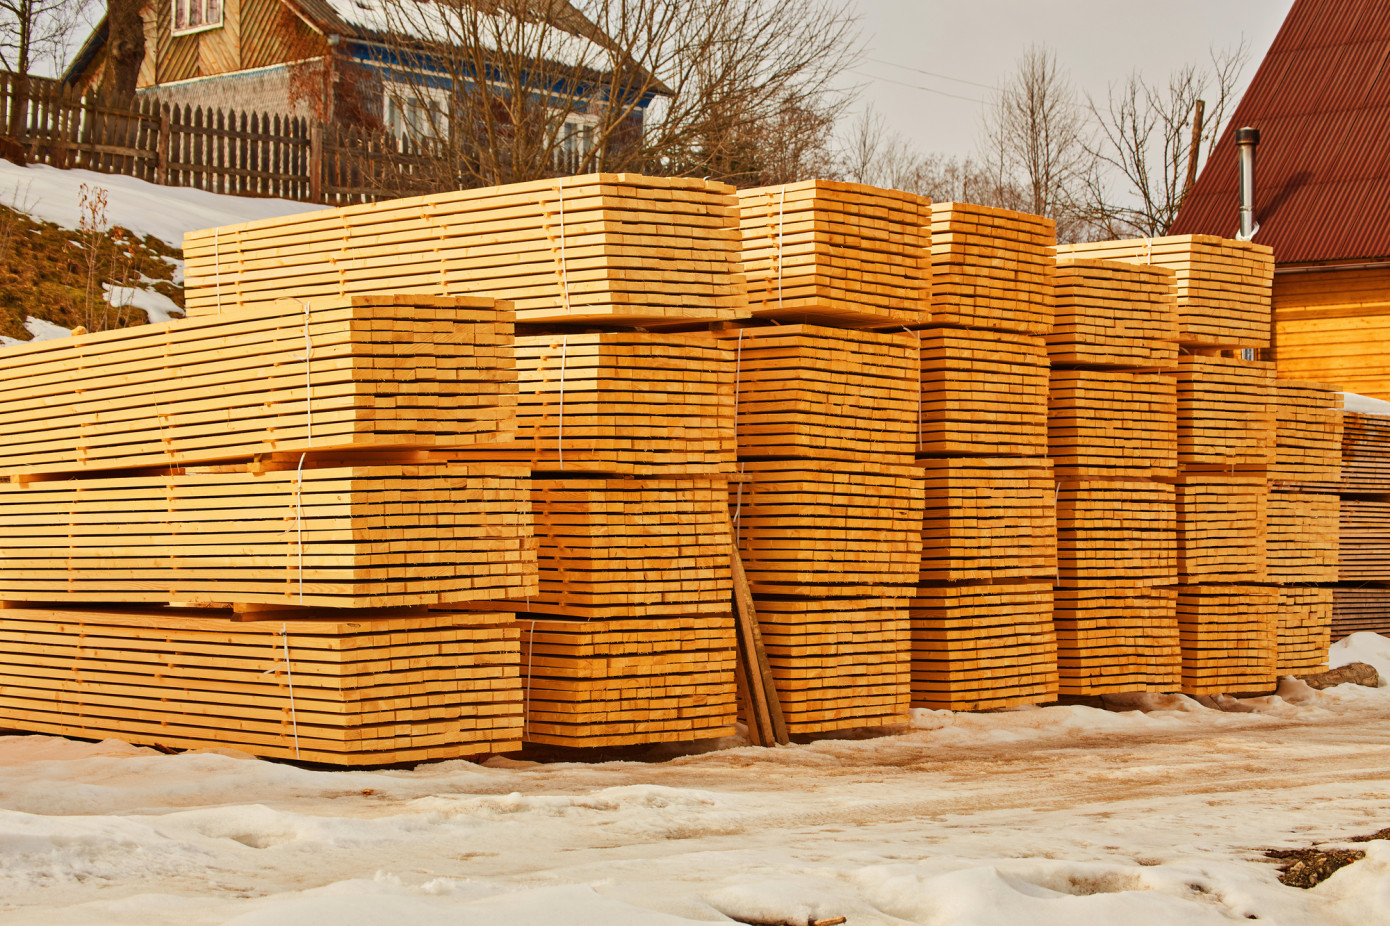 In March, price for lumber exported from Germany to U.S. rises 3%